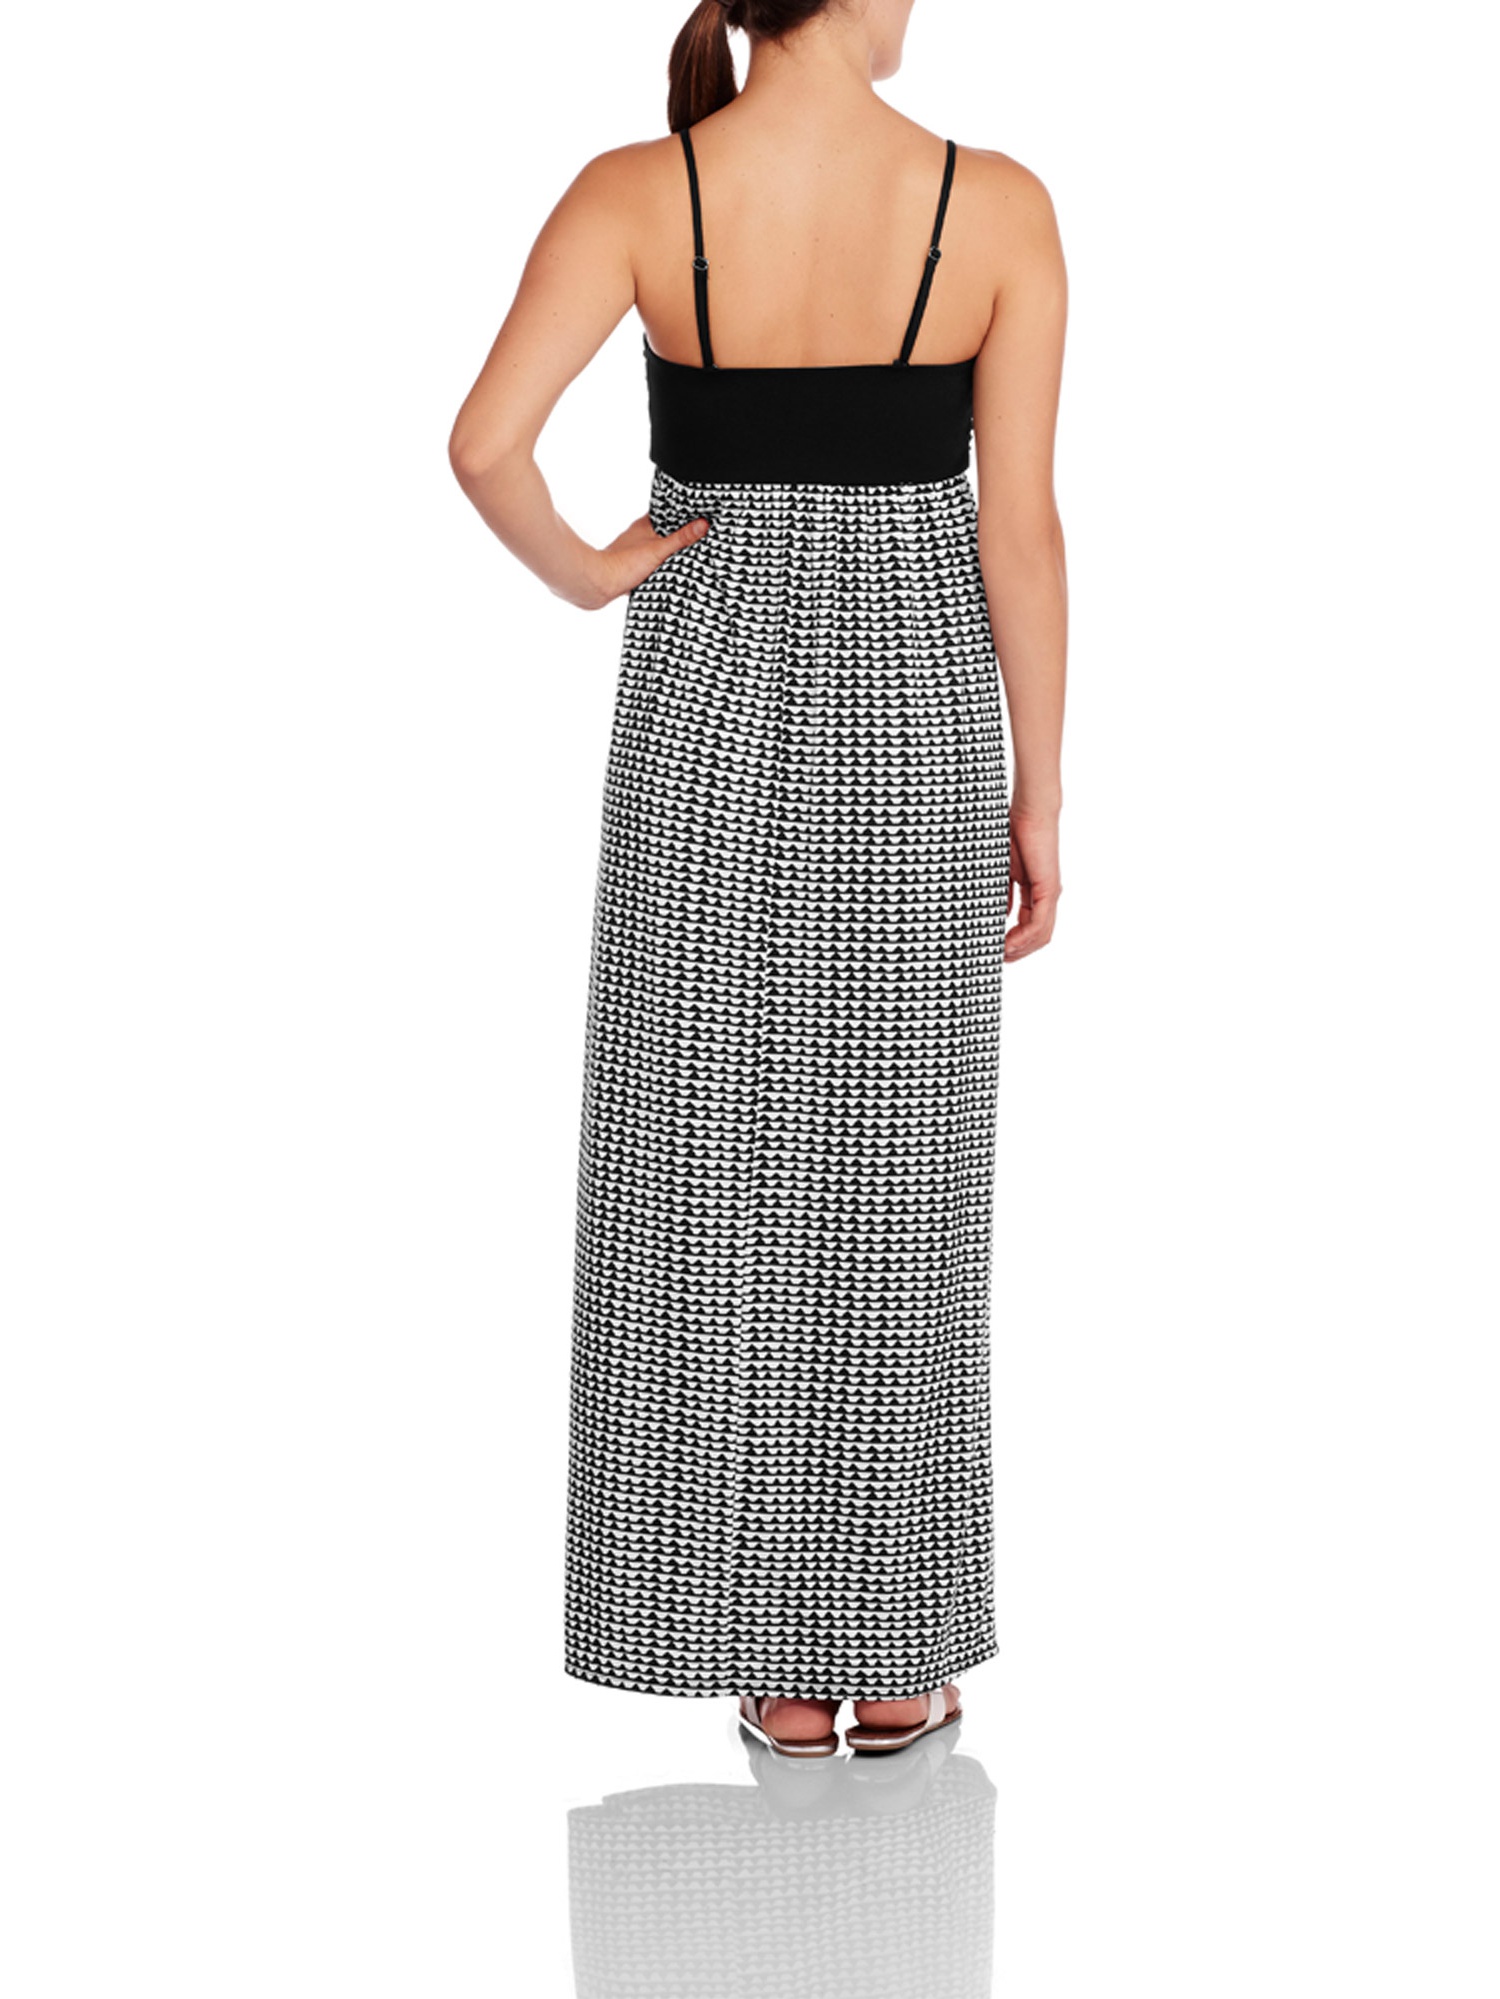 Women's Maxi Dress with Removable Straps - image 2 of 2